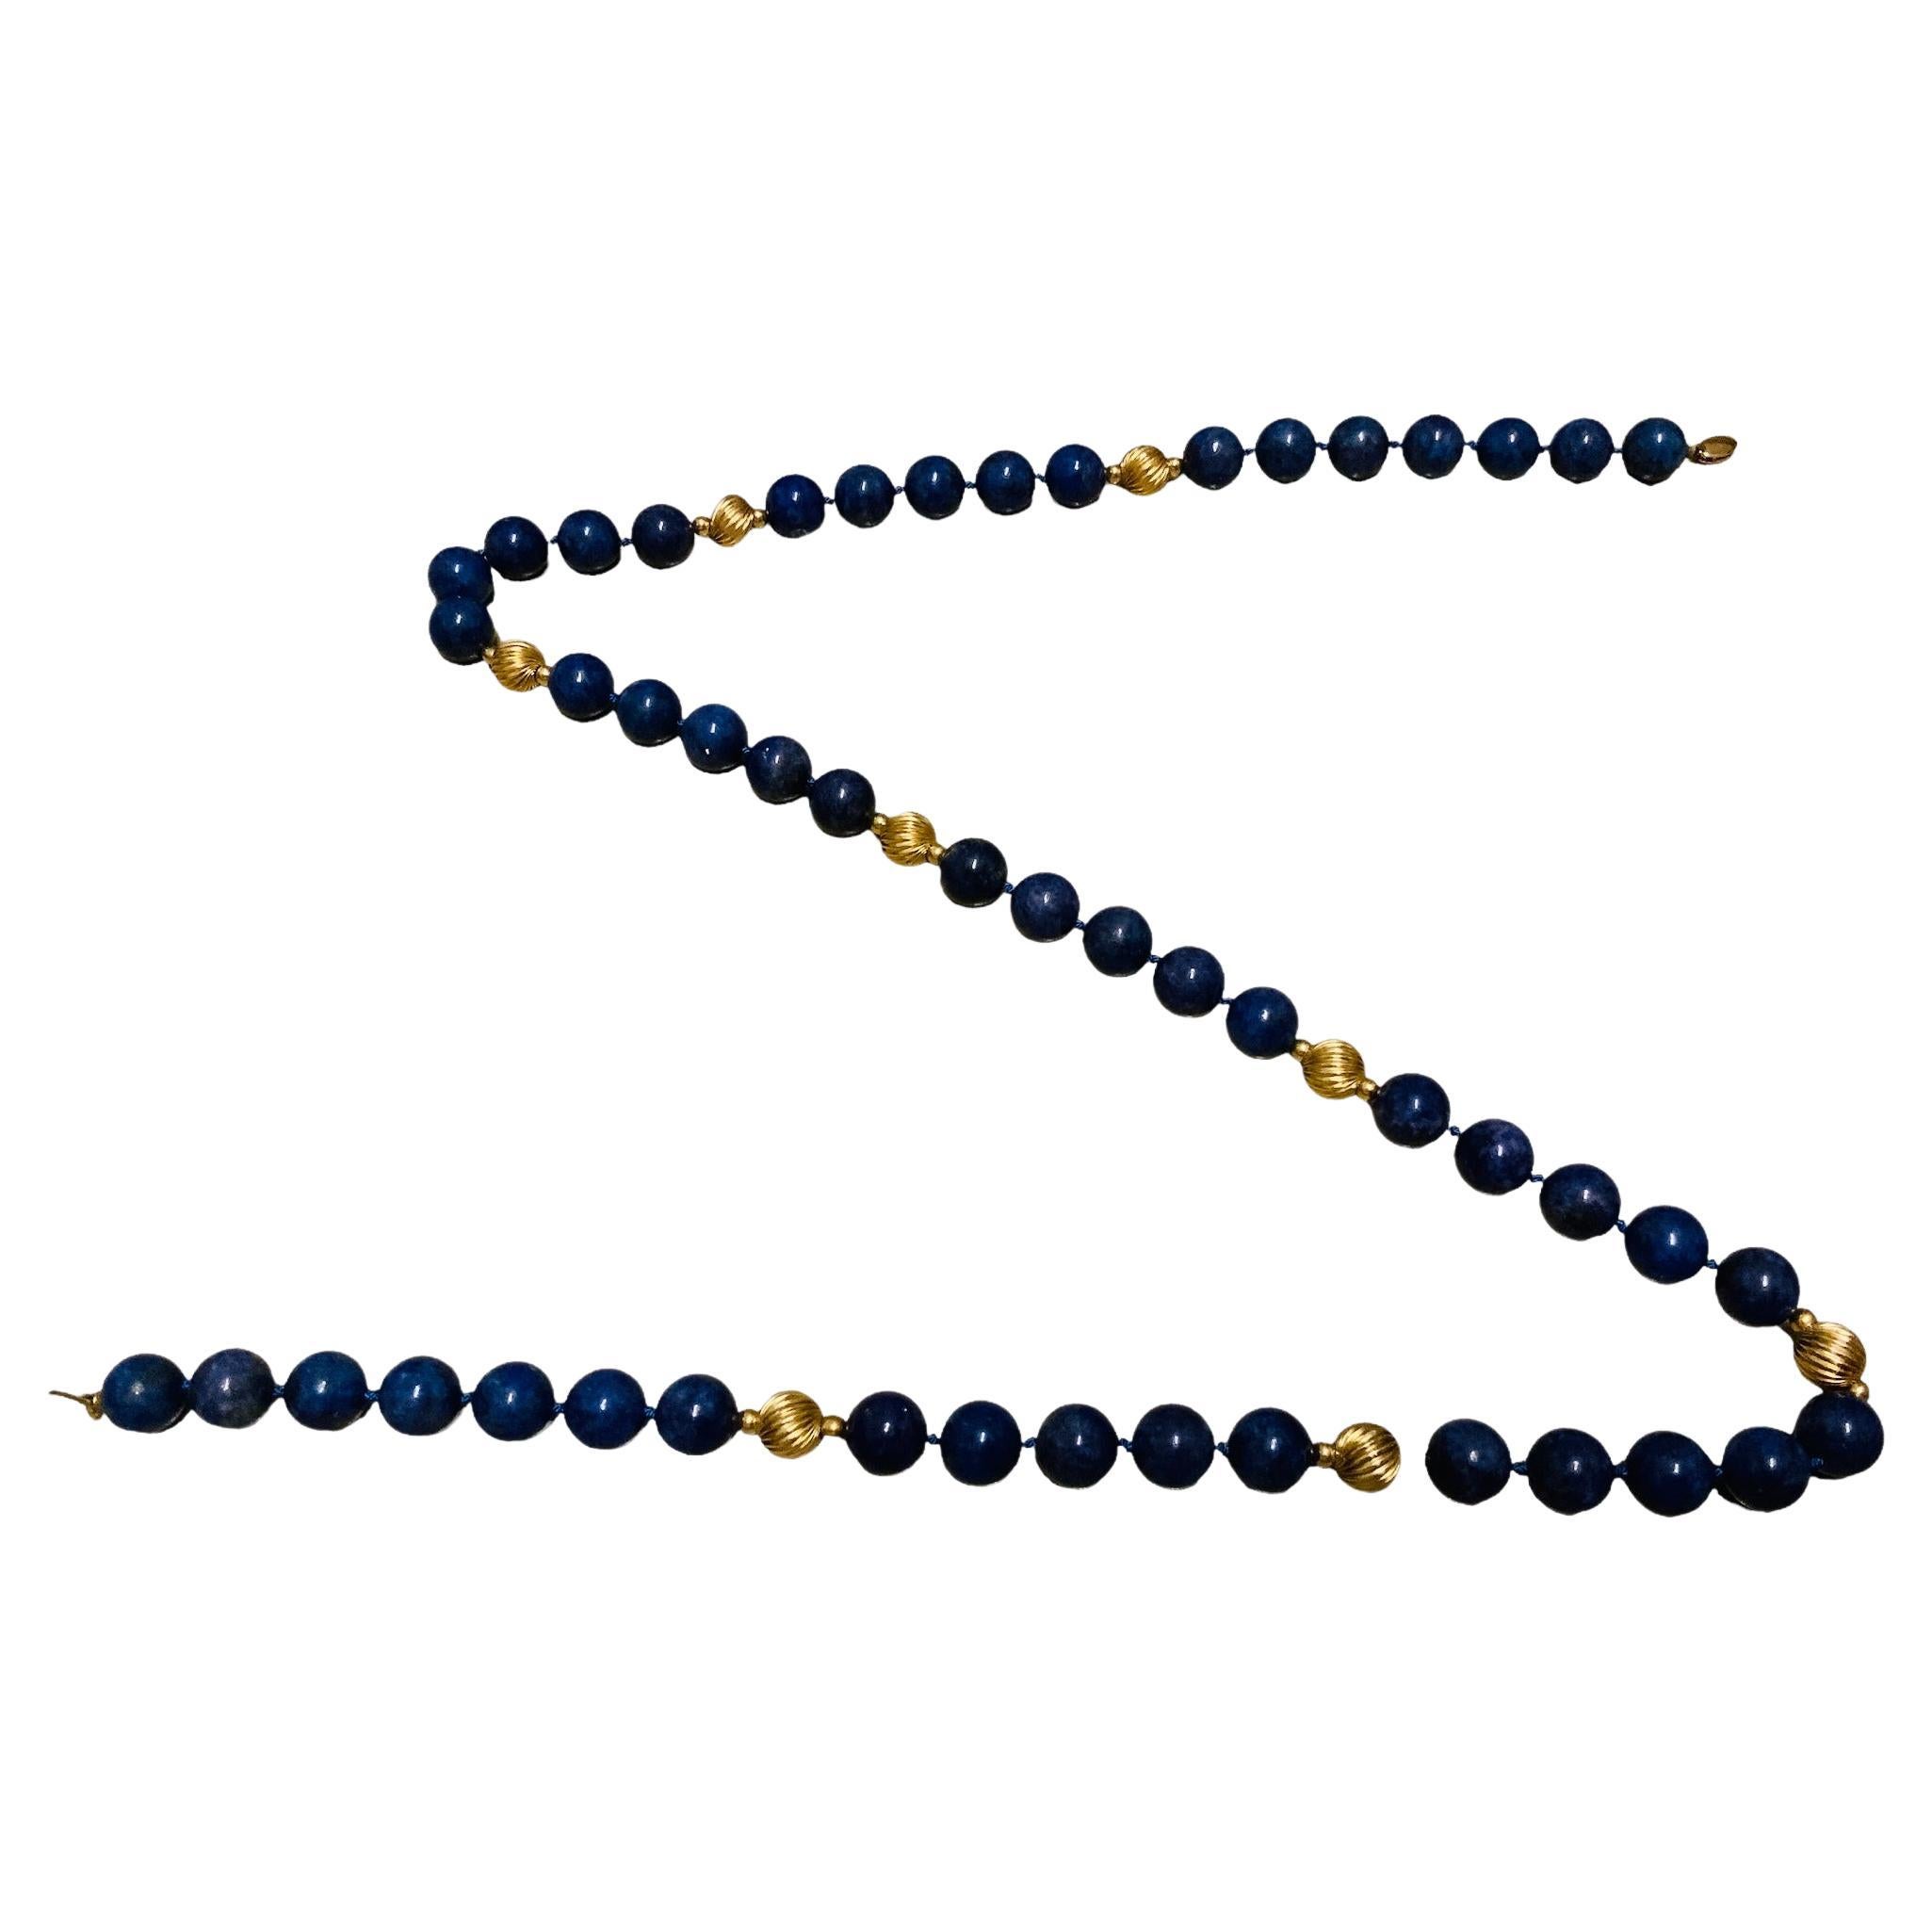 This is a Lapis lazuli and gold beads long necklace. It depicts a necklace made of round large Lapis lazuli spheres fasten on a string. It is adorned with large ribbed in spiral way gold beads that are also placed in the same way. Lapis lazuli beads